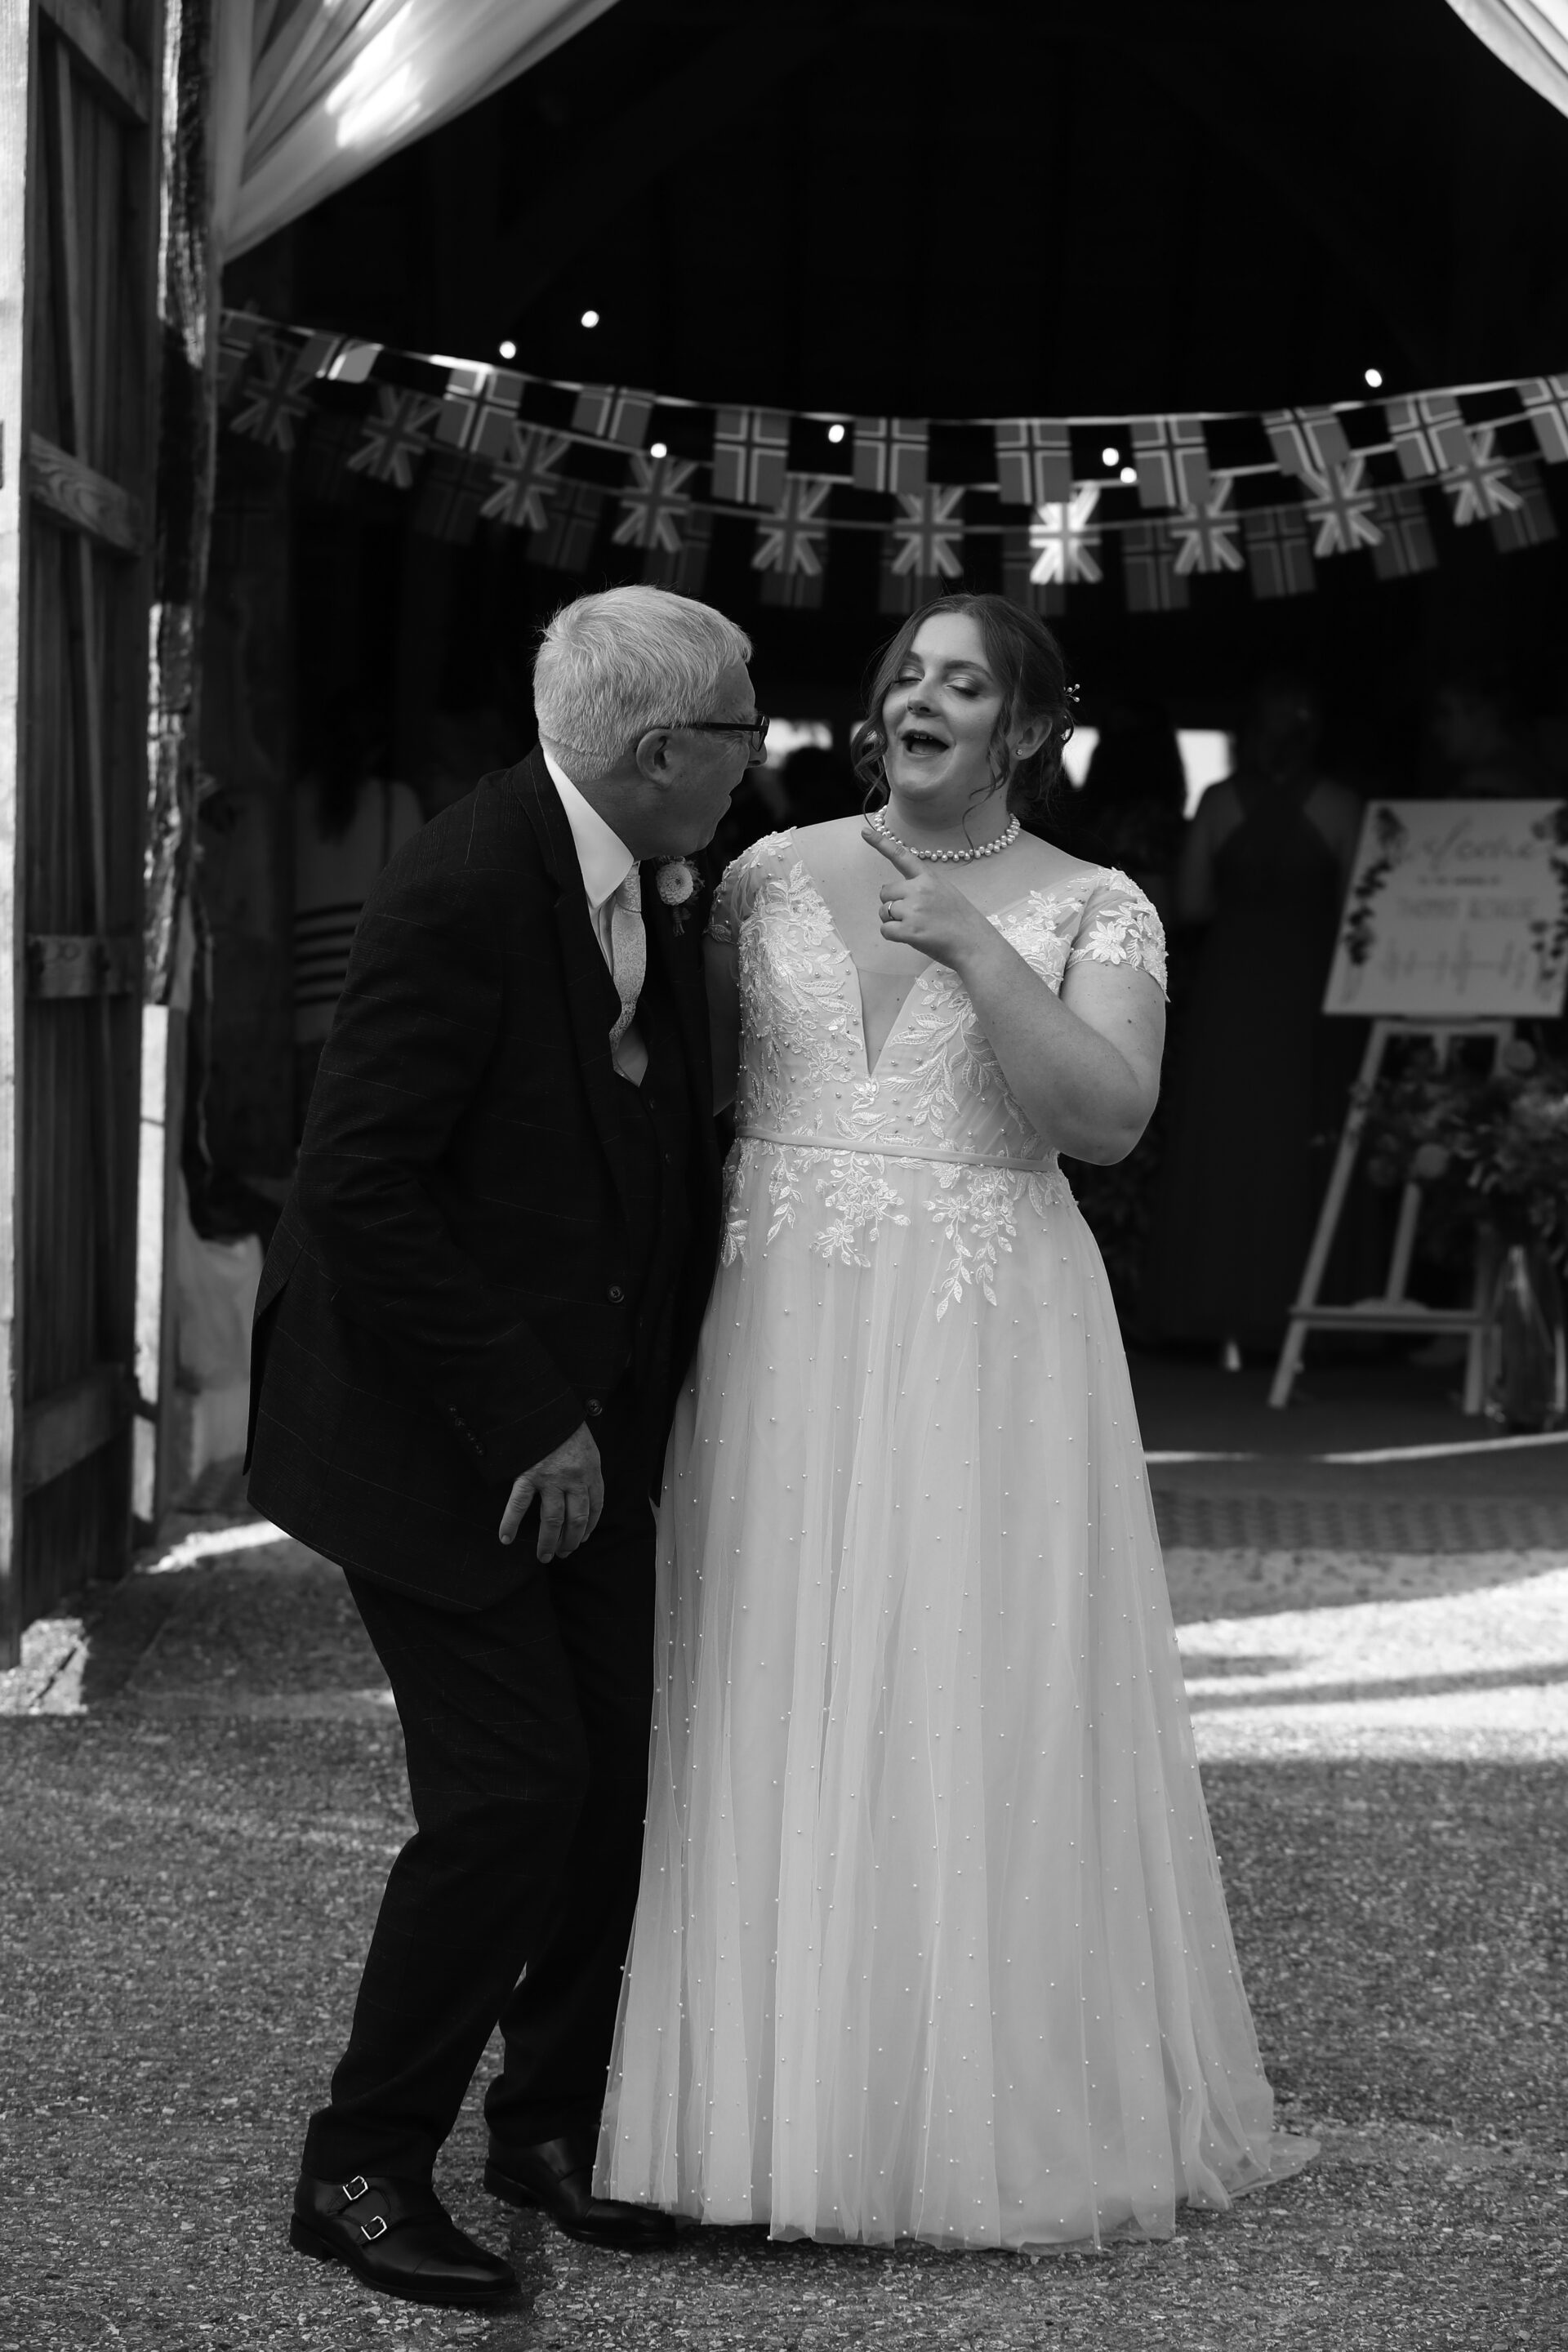 bride and bride's father at barn wedding at Sullington Manor Farm, West Sussex, RH20 4AE. Farm wedding in heart of South Downs.